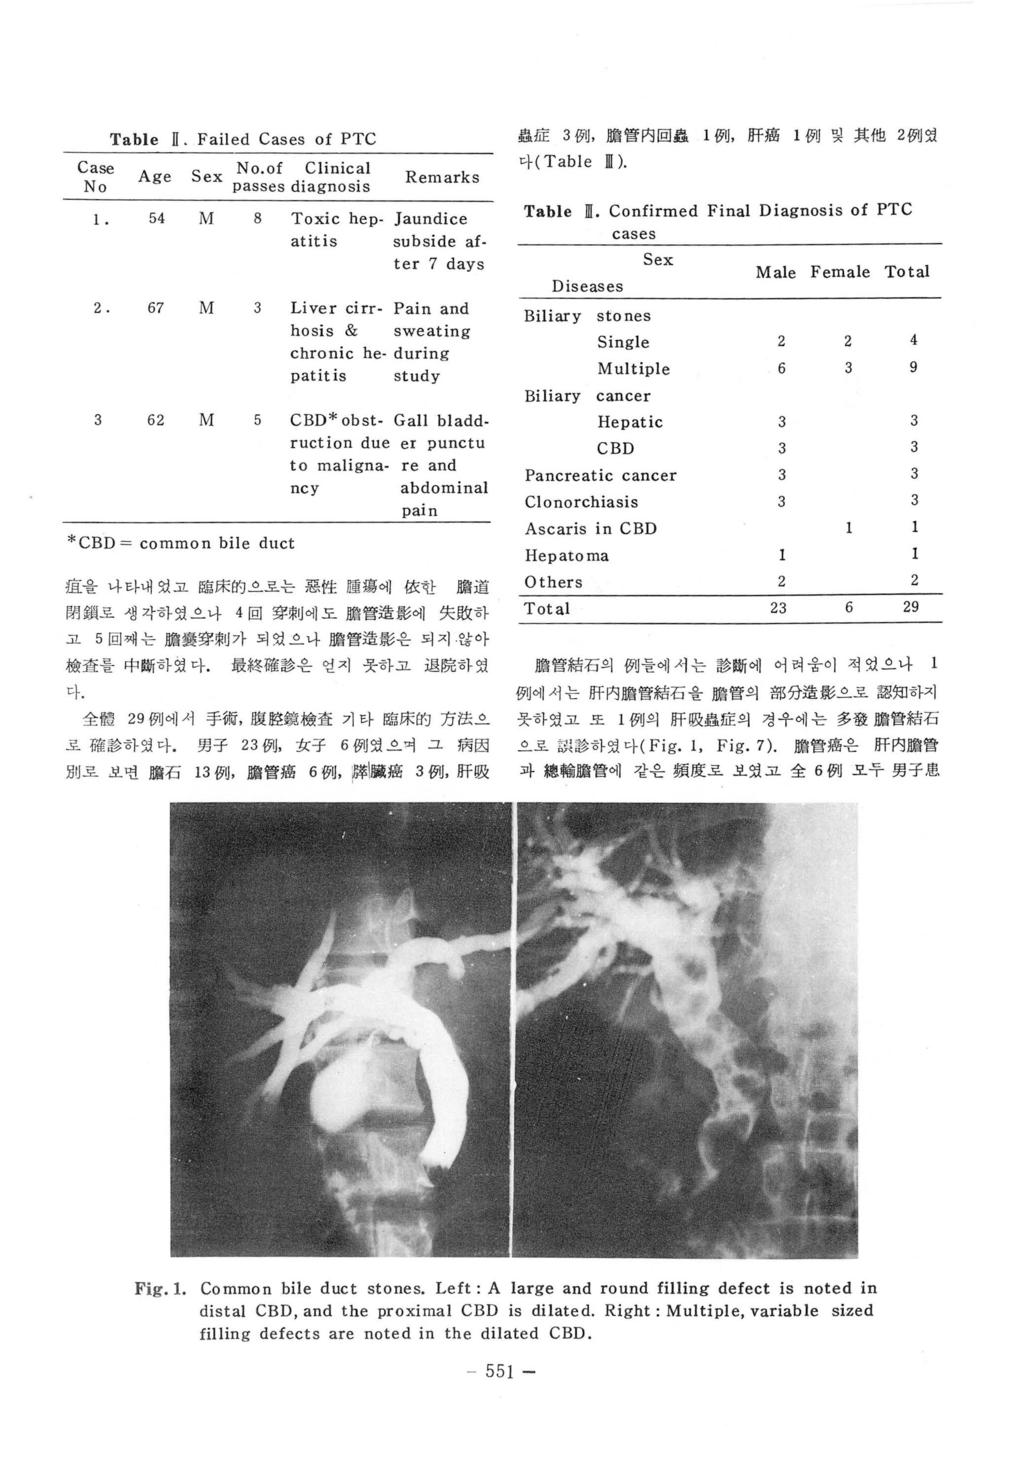 Case No Table ll. Failed Cases of PTC 훌융 lle 3 例, 脫管內回蟲 1 i7jj. 府橫 l 例및其他 2 例였 마 ( Table 111). Age Sex ex No.of Clinical passes diagnosis Remarks 2.